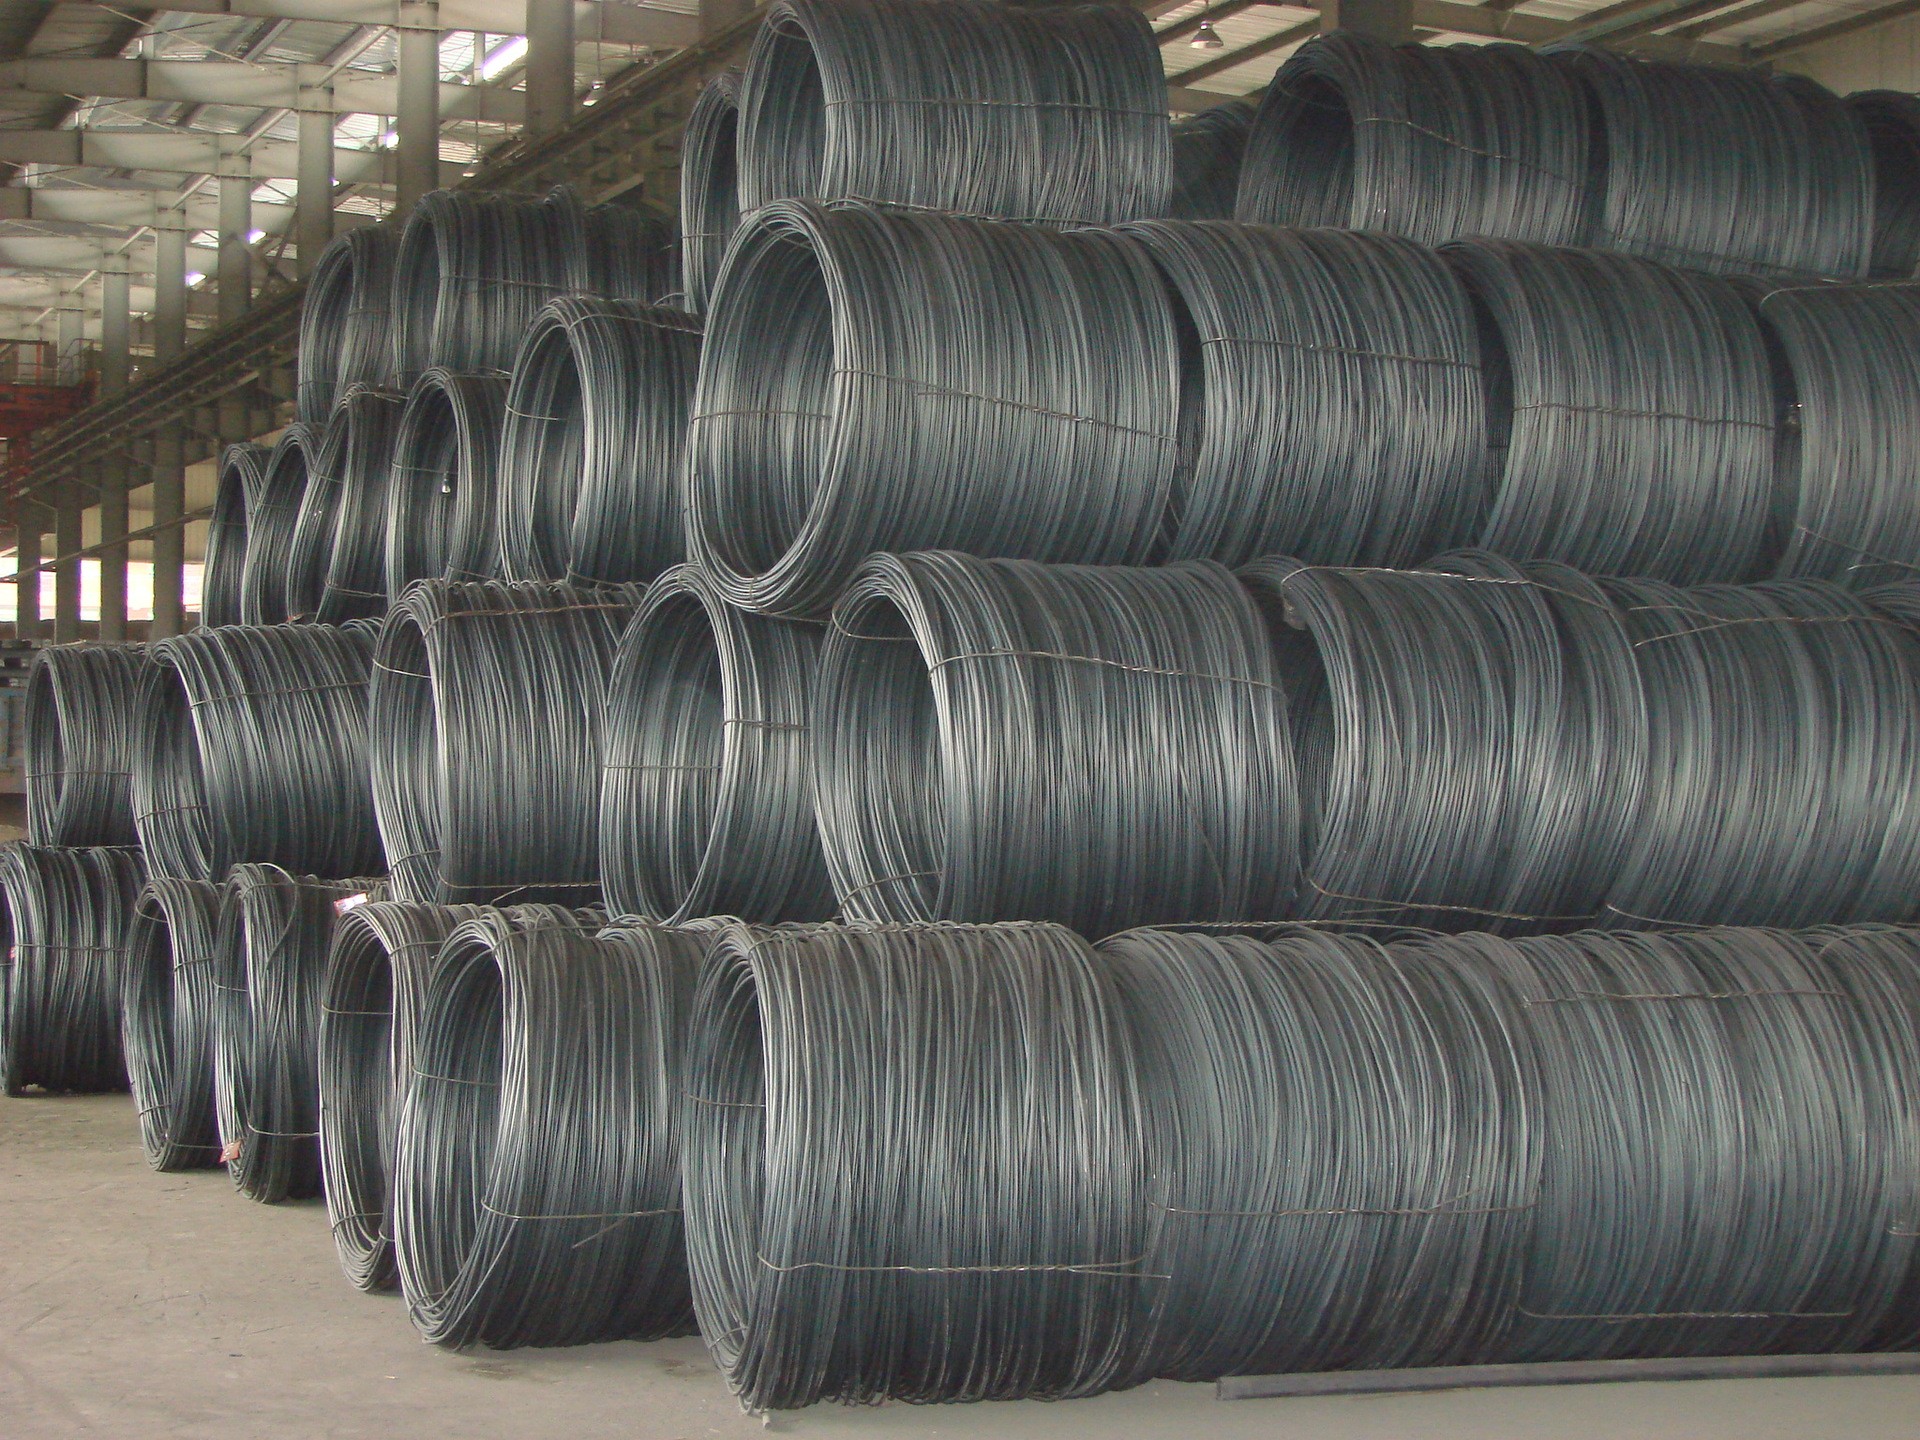 high quality steel wire rod